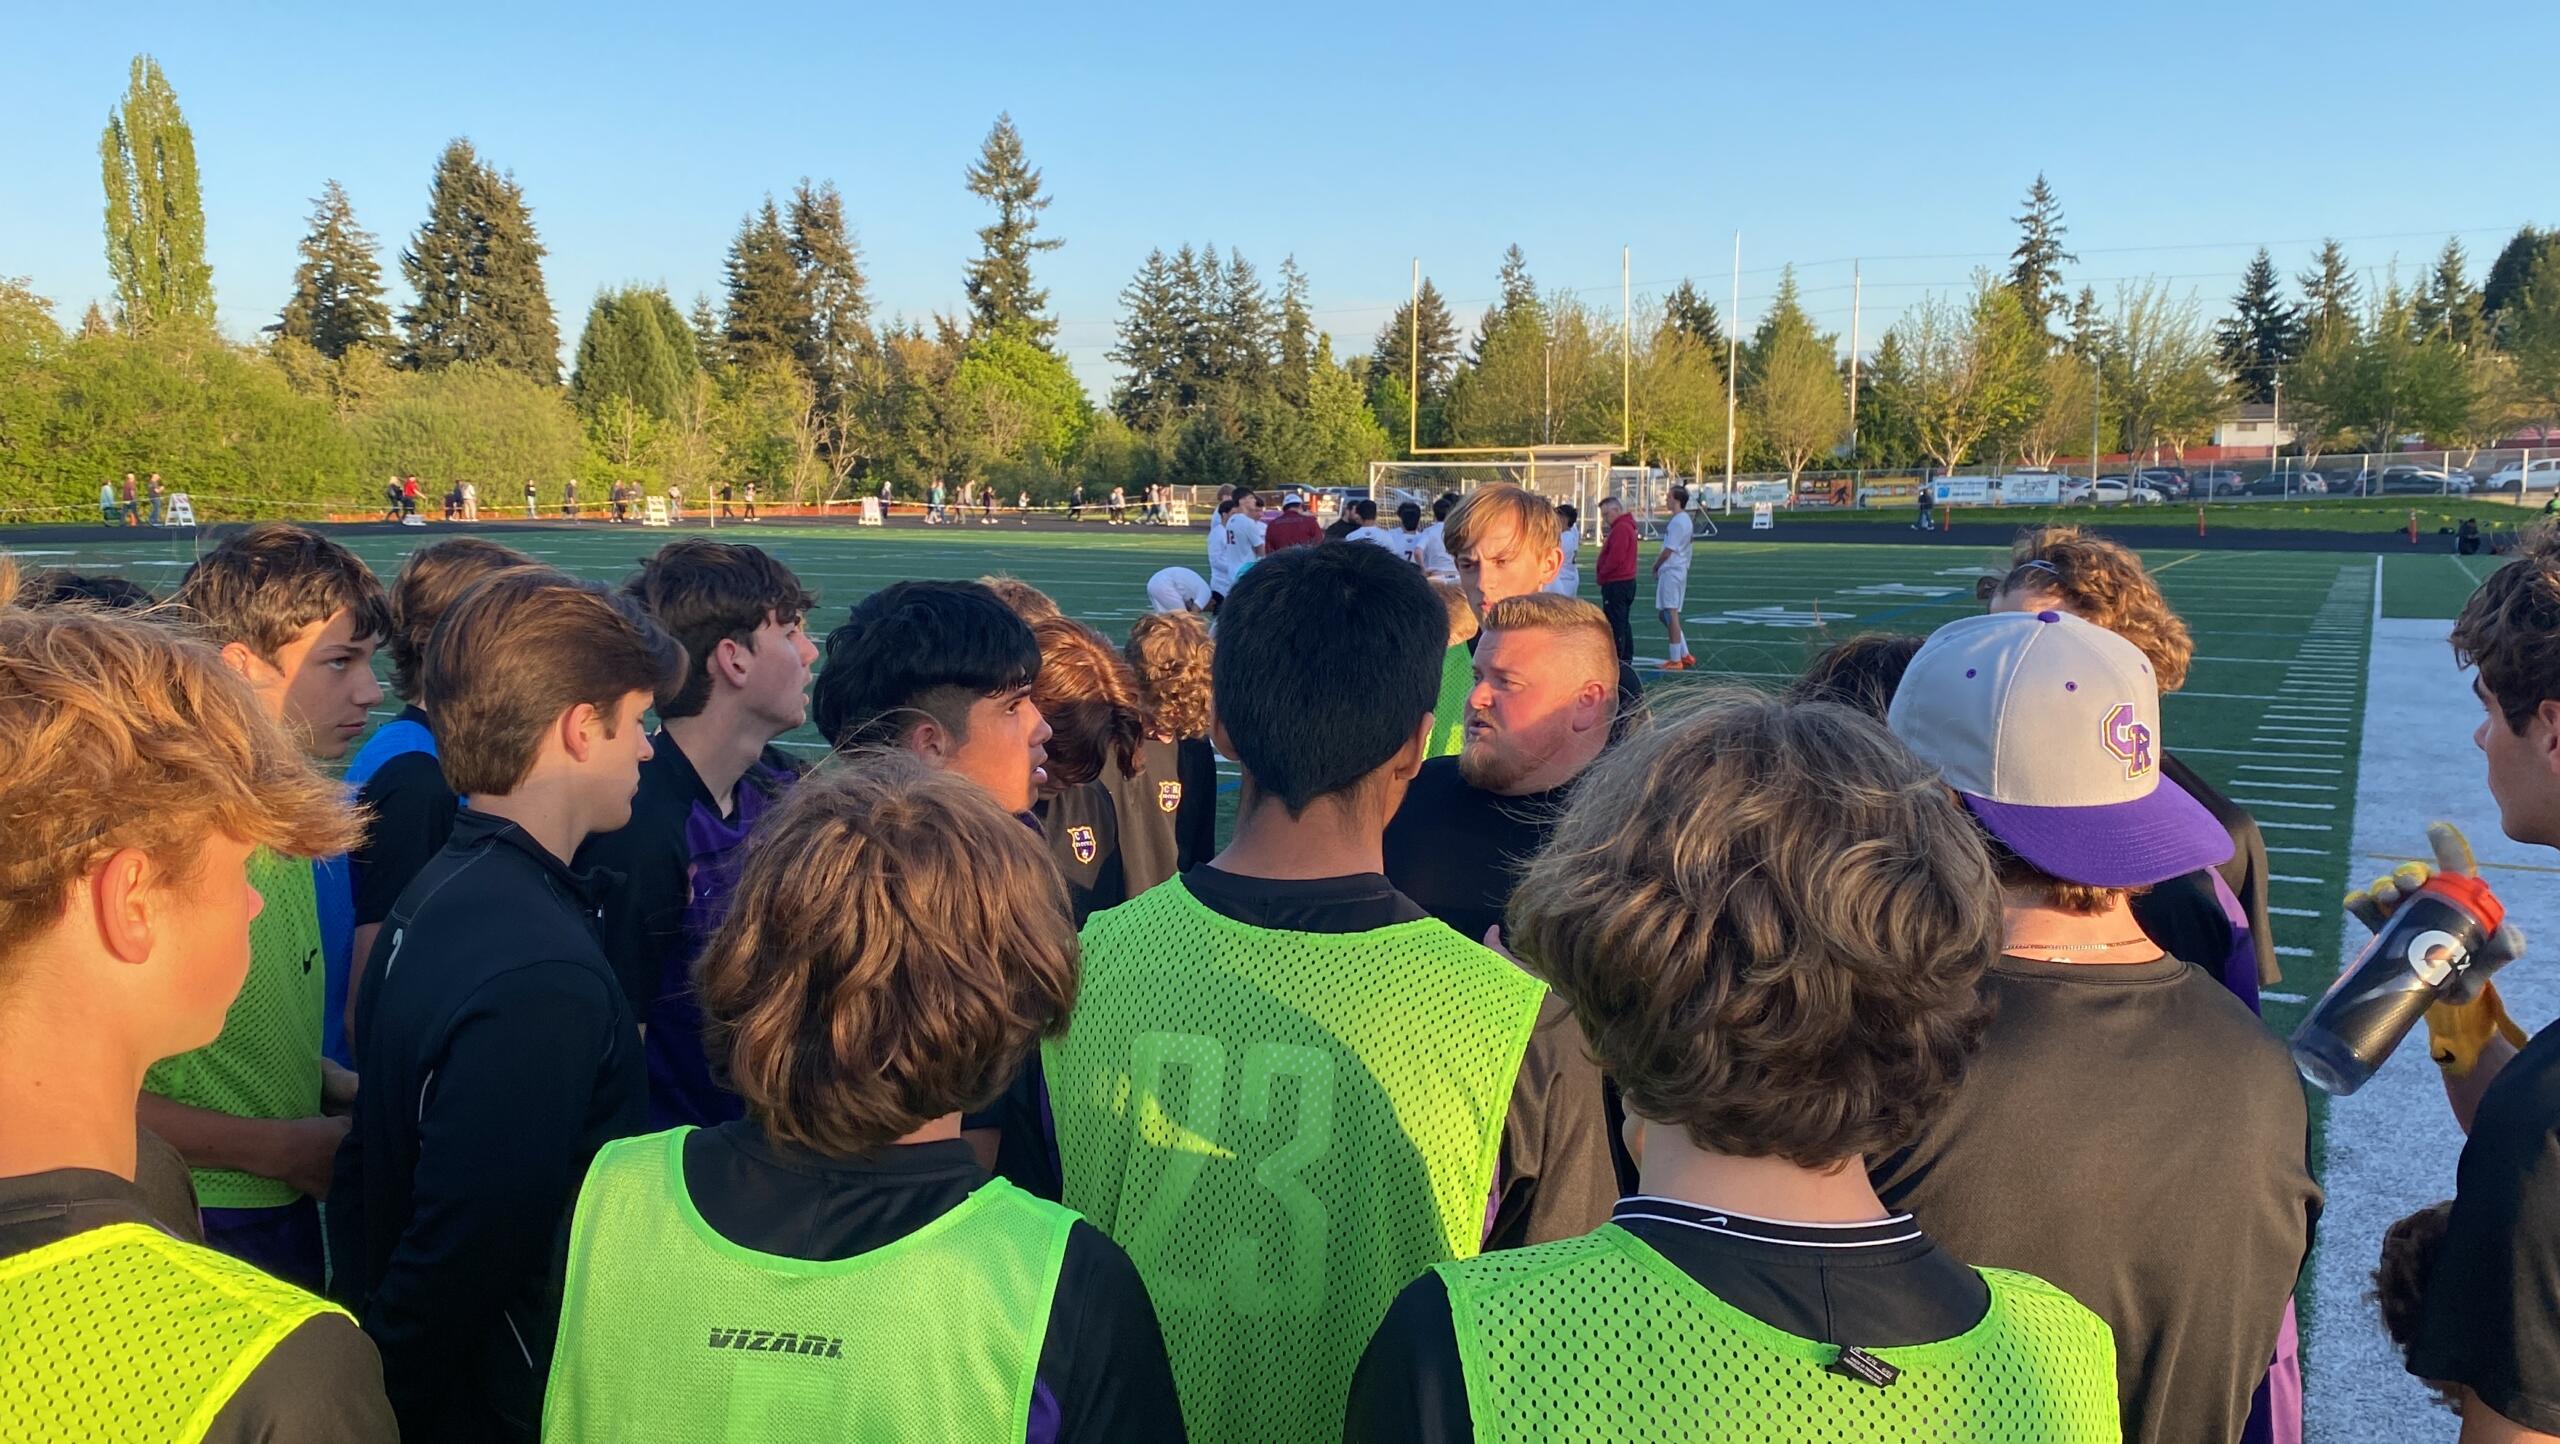 First-year Columbia River boys soccer coach Matt Newman addresses his team after Tuesday's 3-1 victory over W.F. West in their 2A District IV semifinal match. The win clinches a 2A state berth for the Rapids (19-0-0), who face Aberdeen on Thursday.